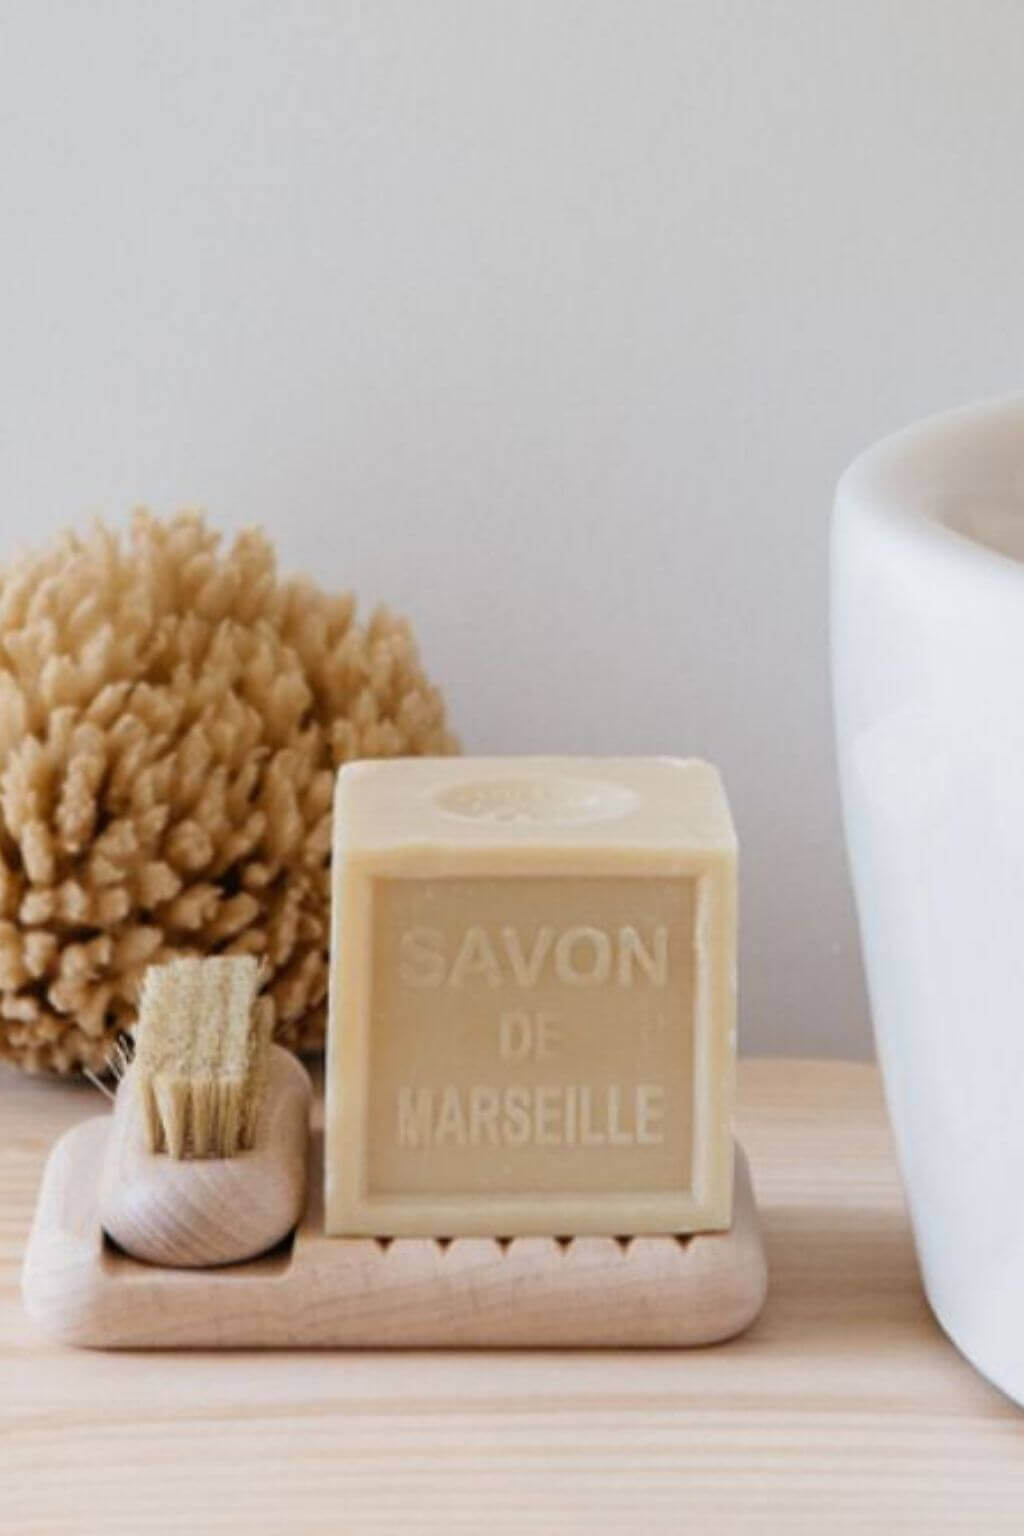 https://cdn.shopify.com/s/files/1/0150/0674/products/andree-jardin-french-beech-wood-soap-dish-nail-brush-set-29734591037520.jpg?crop=center&height=1536&v=1649536749&width=1024